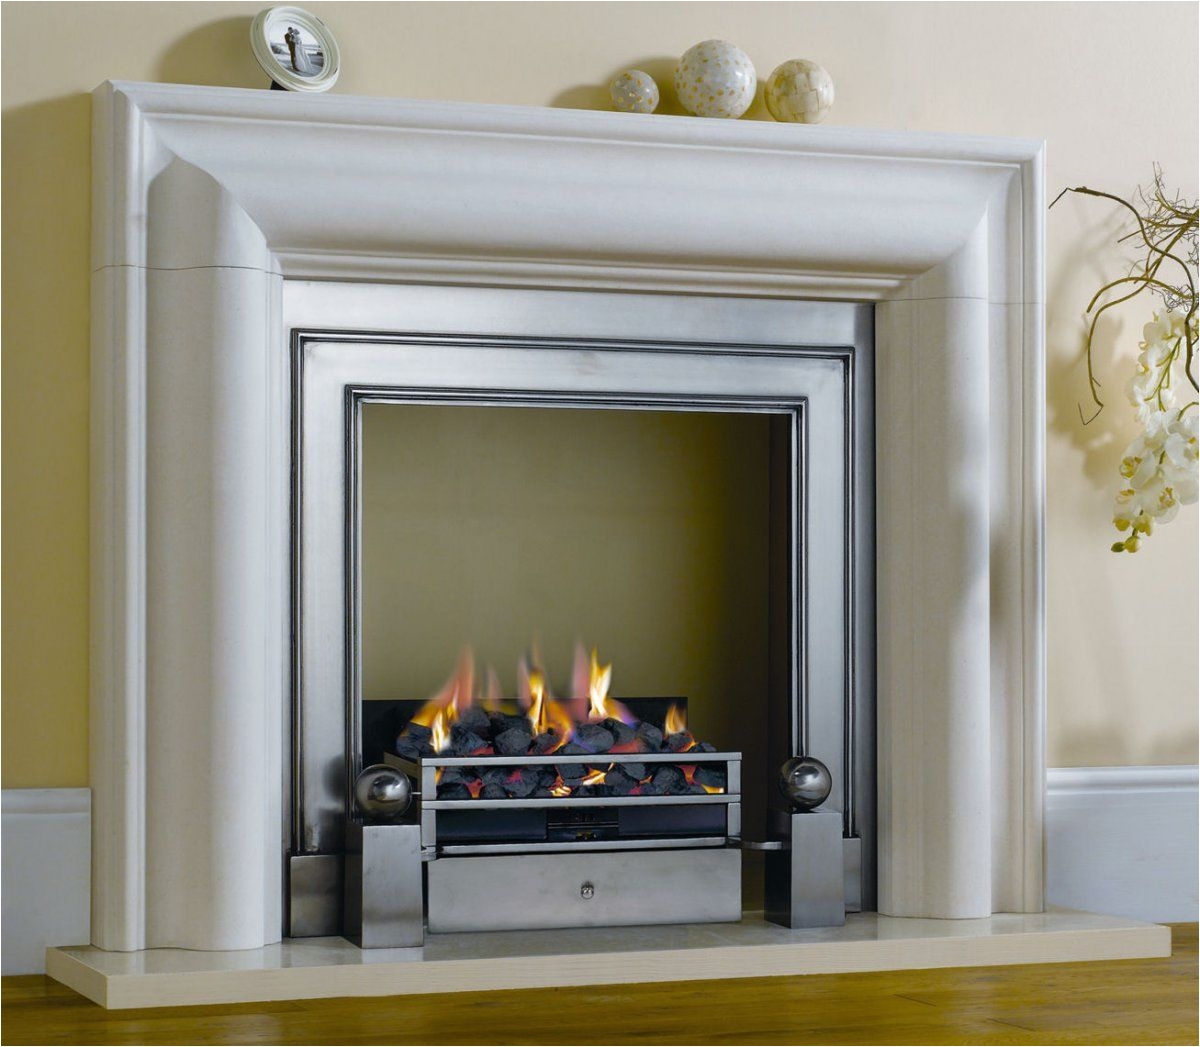 the grafton stone mantel is available in a choice of natural limestone and antique white marble